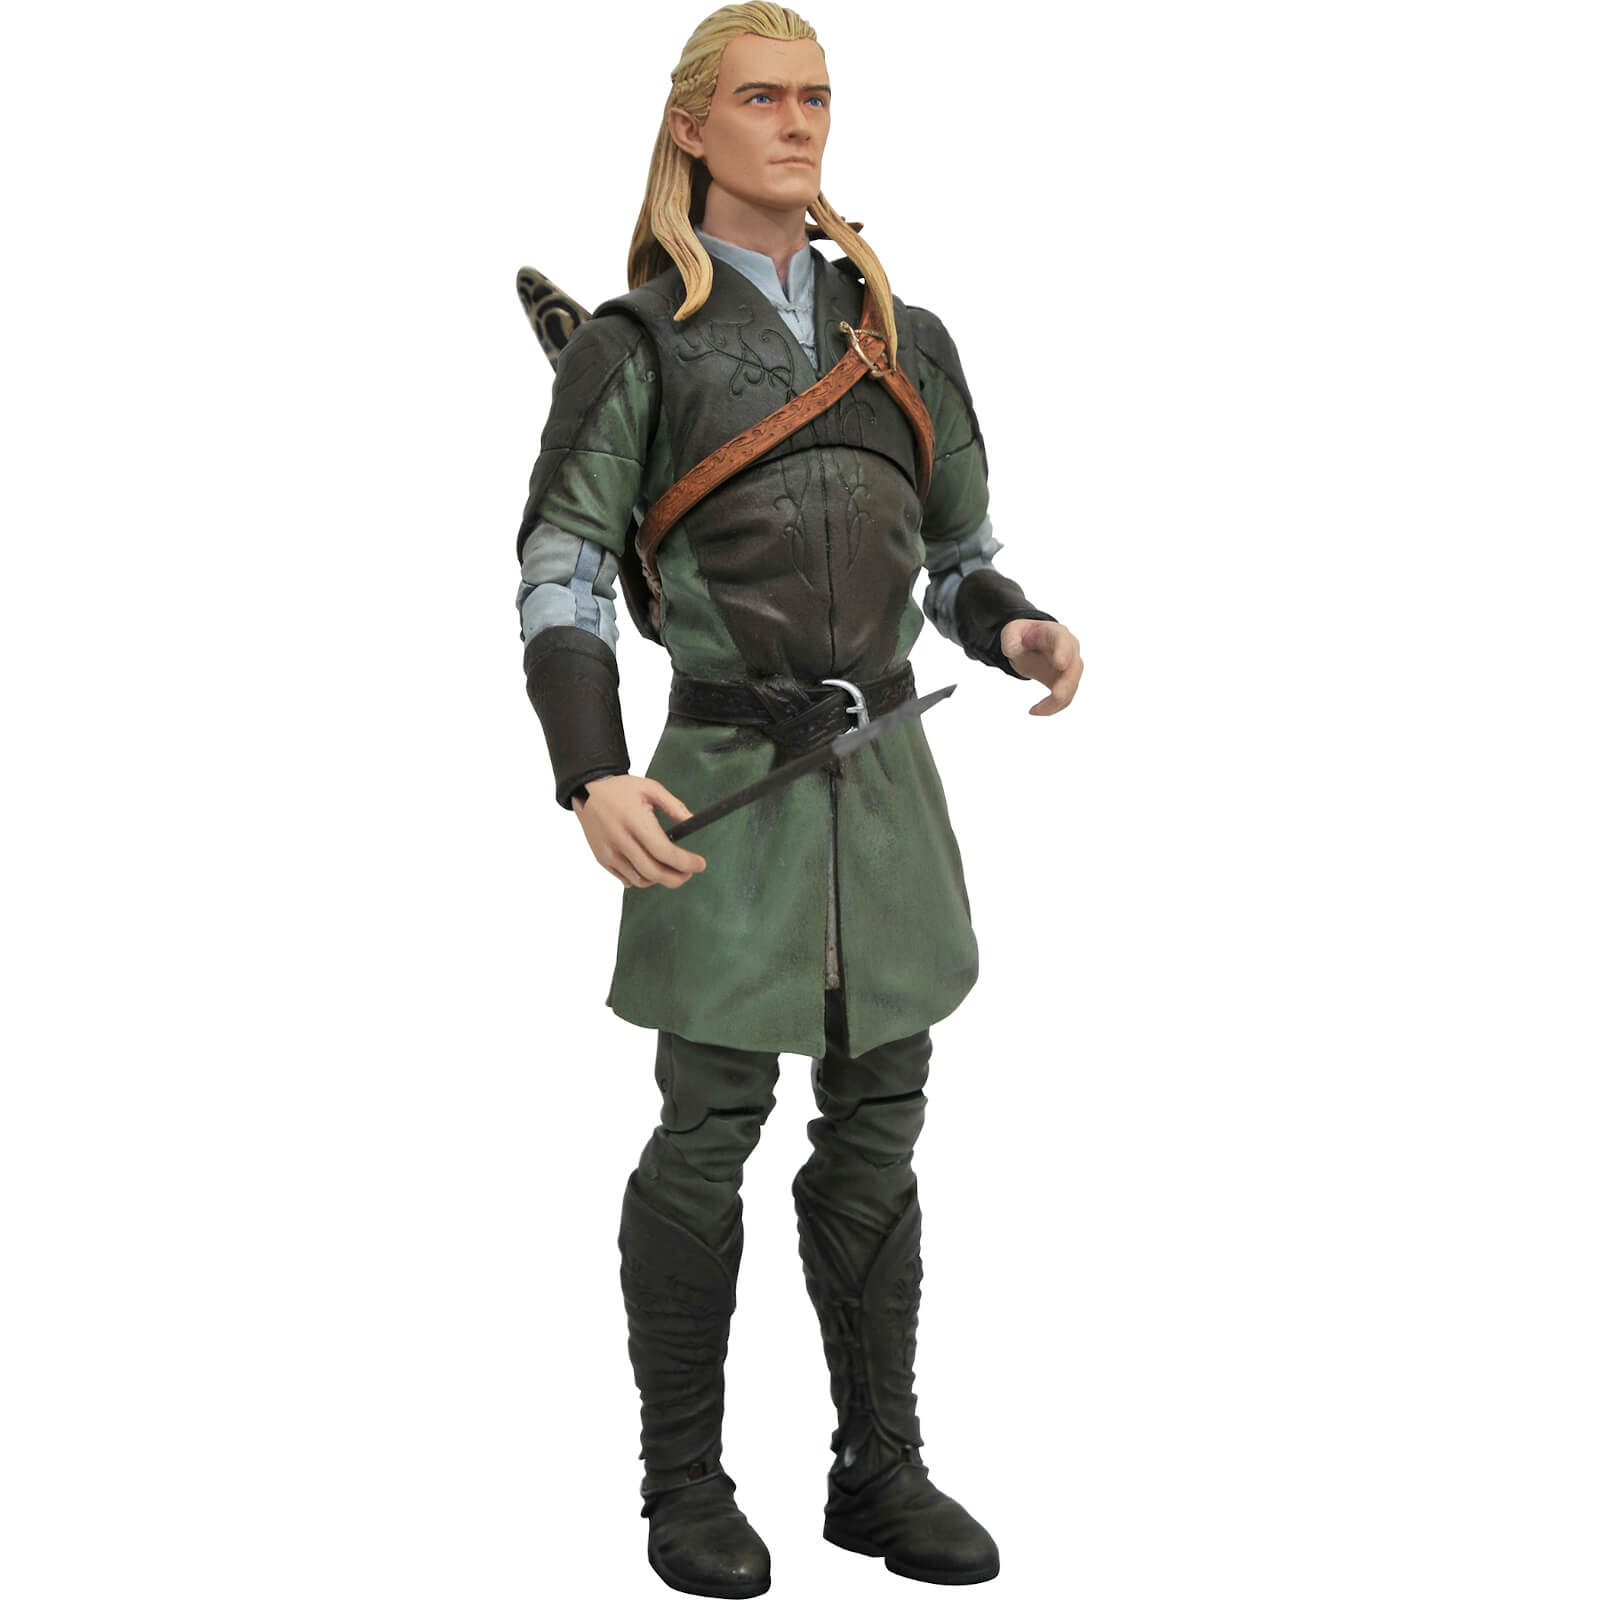 Lord of the Rings series Legolas action figure 